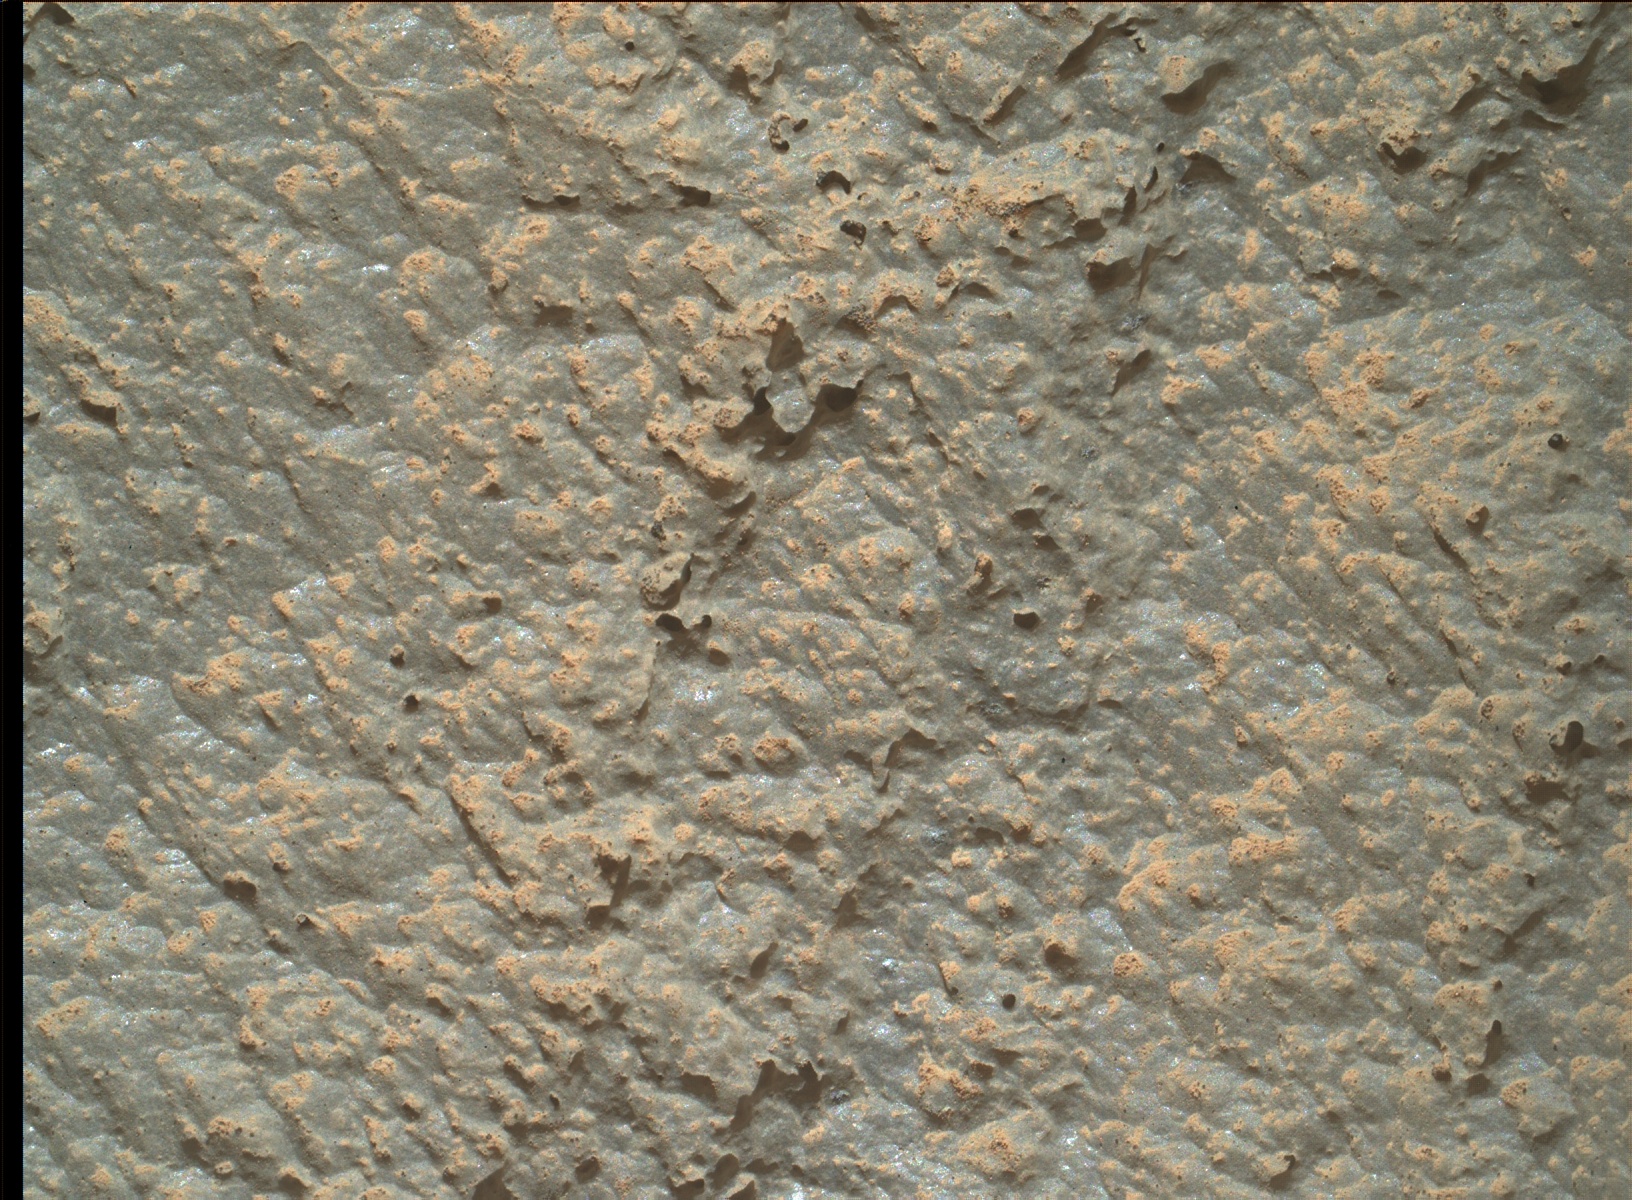 Nasa's Mars rover Curiosity acquired this image using its Mars Hand Lens Imager (MAHLI) on Sol 2631